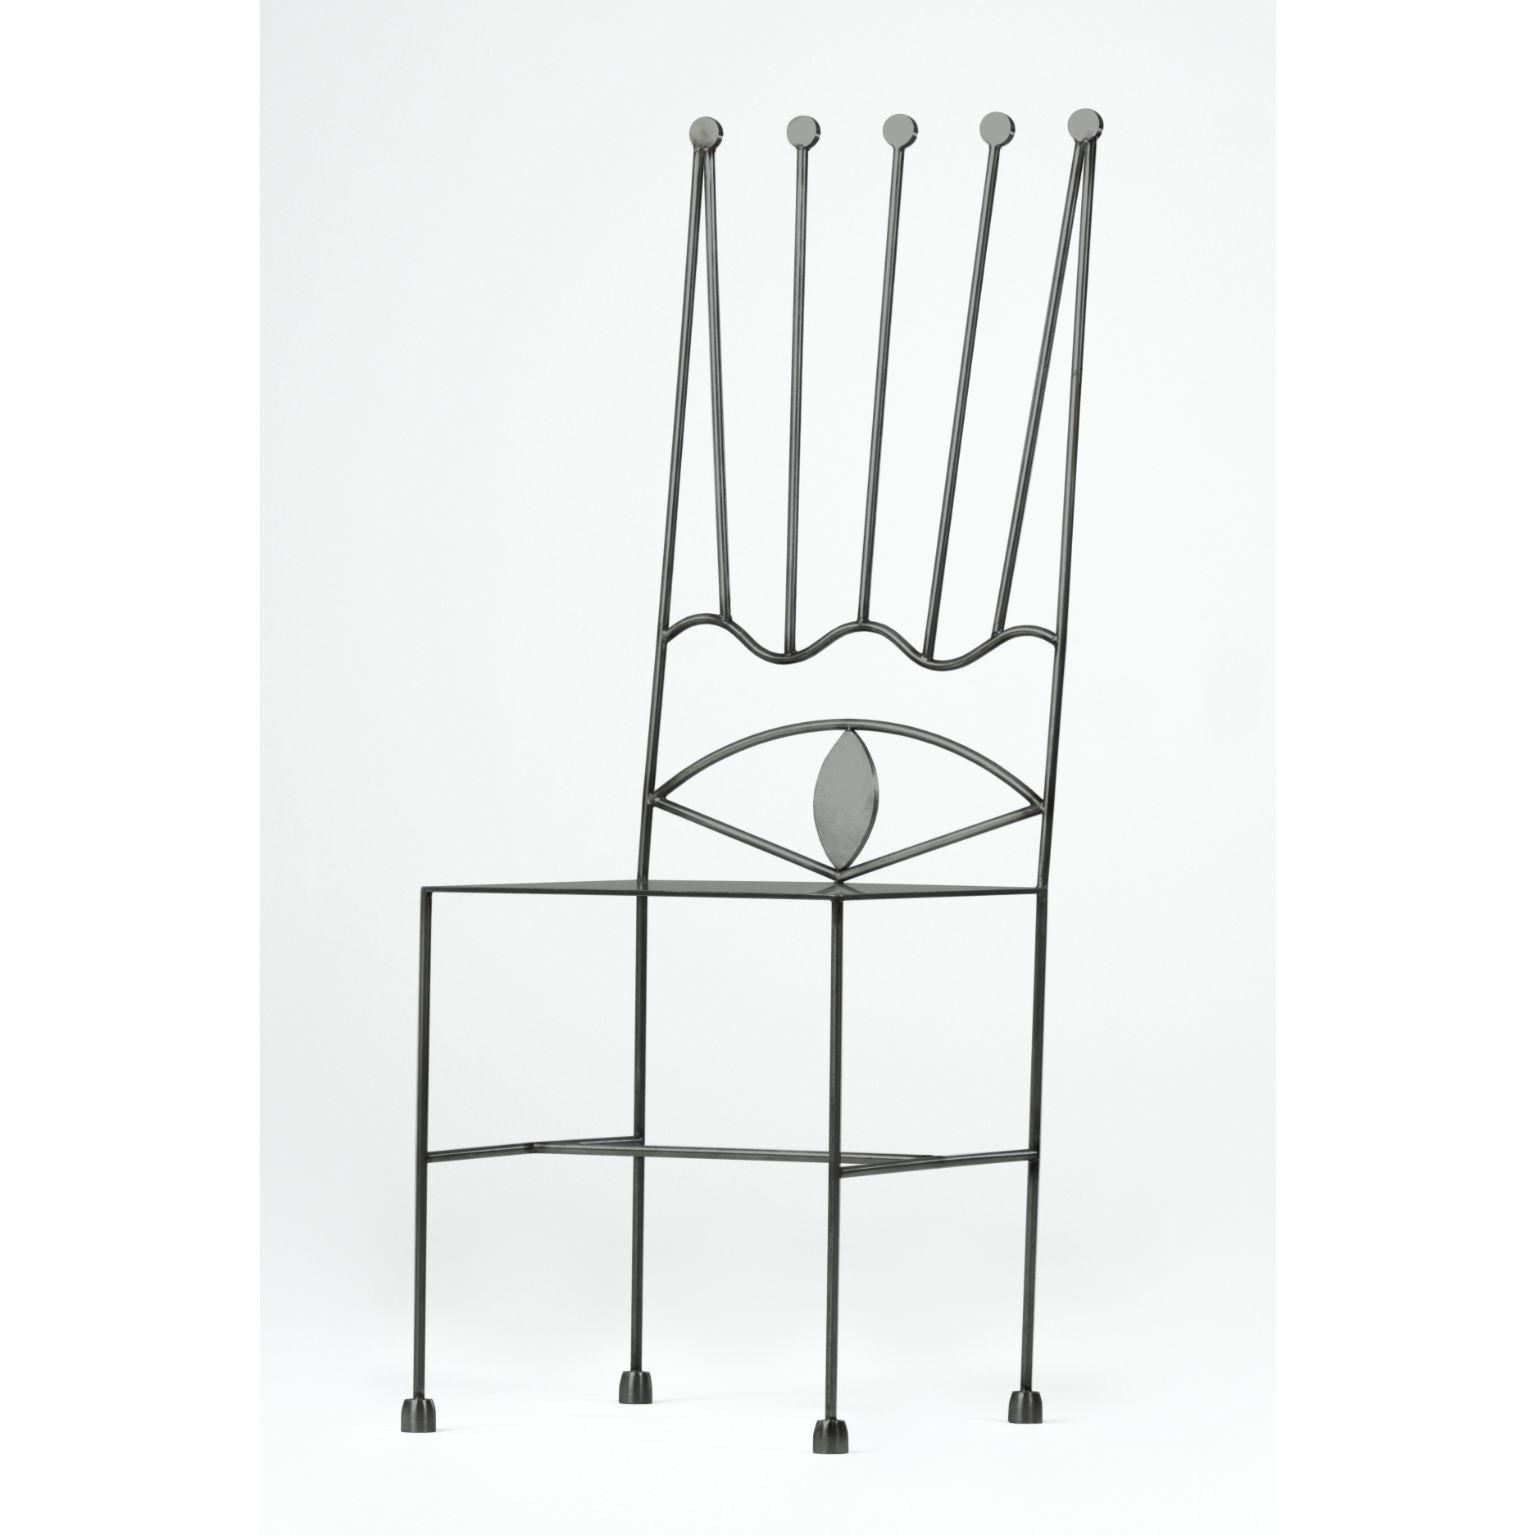 Other Set of 8 Collezione Surrealista Chairs with Cushions by Qvinto Studio For Sale